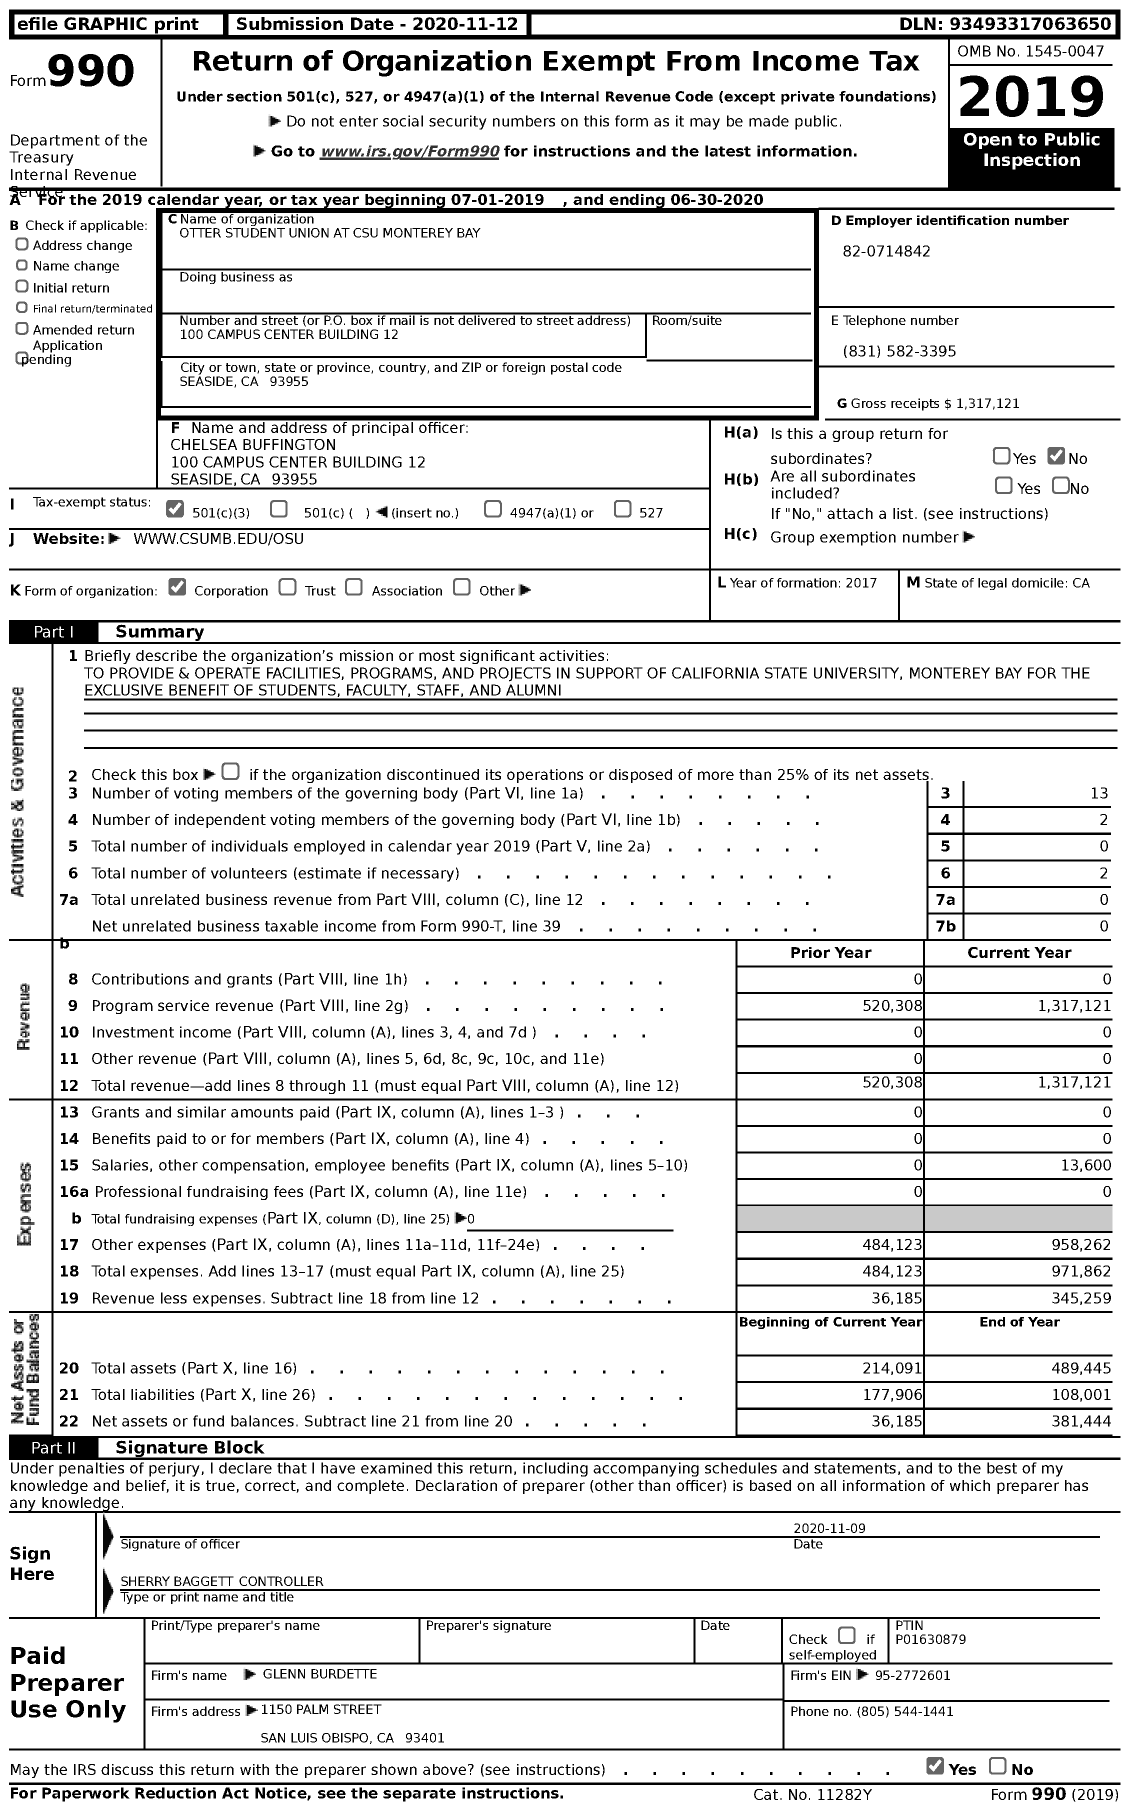 Image of first page of 2019 Form 990 for Otter Student Union at Csu Monterey Bay